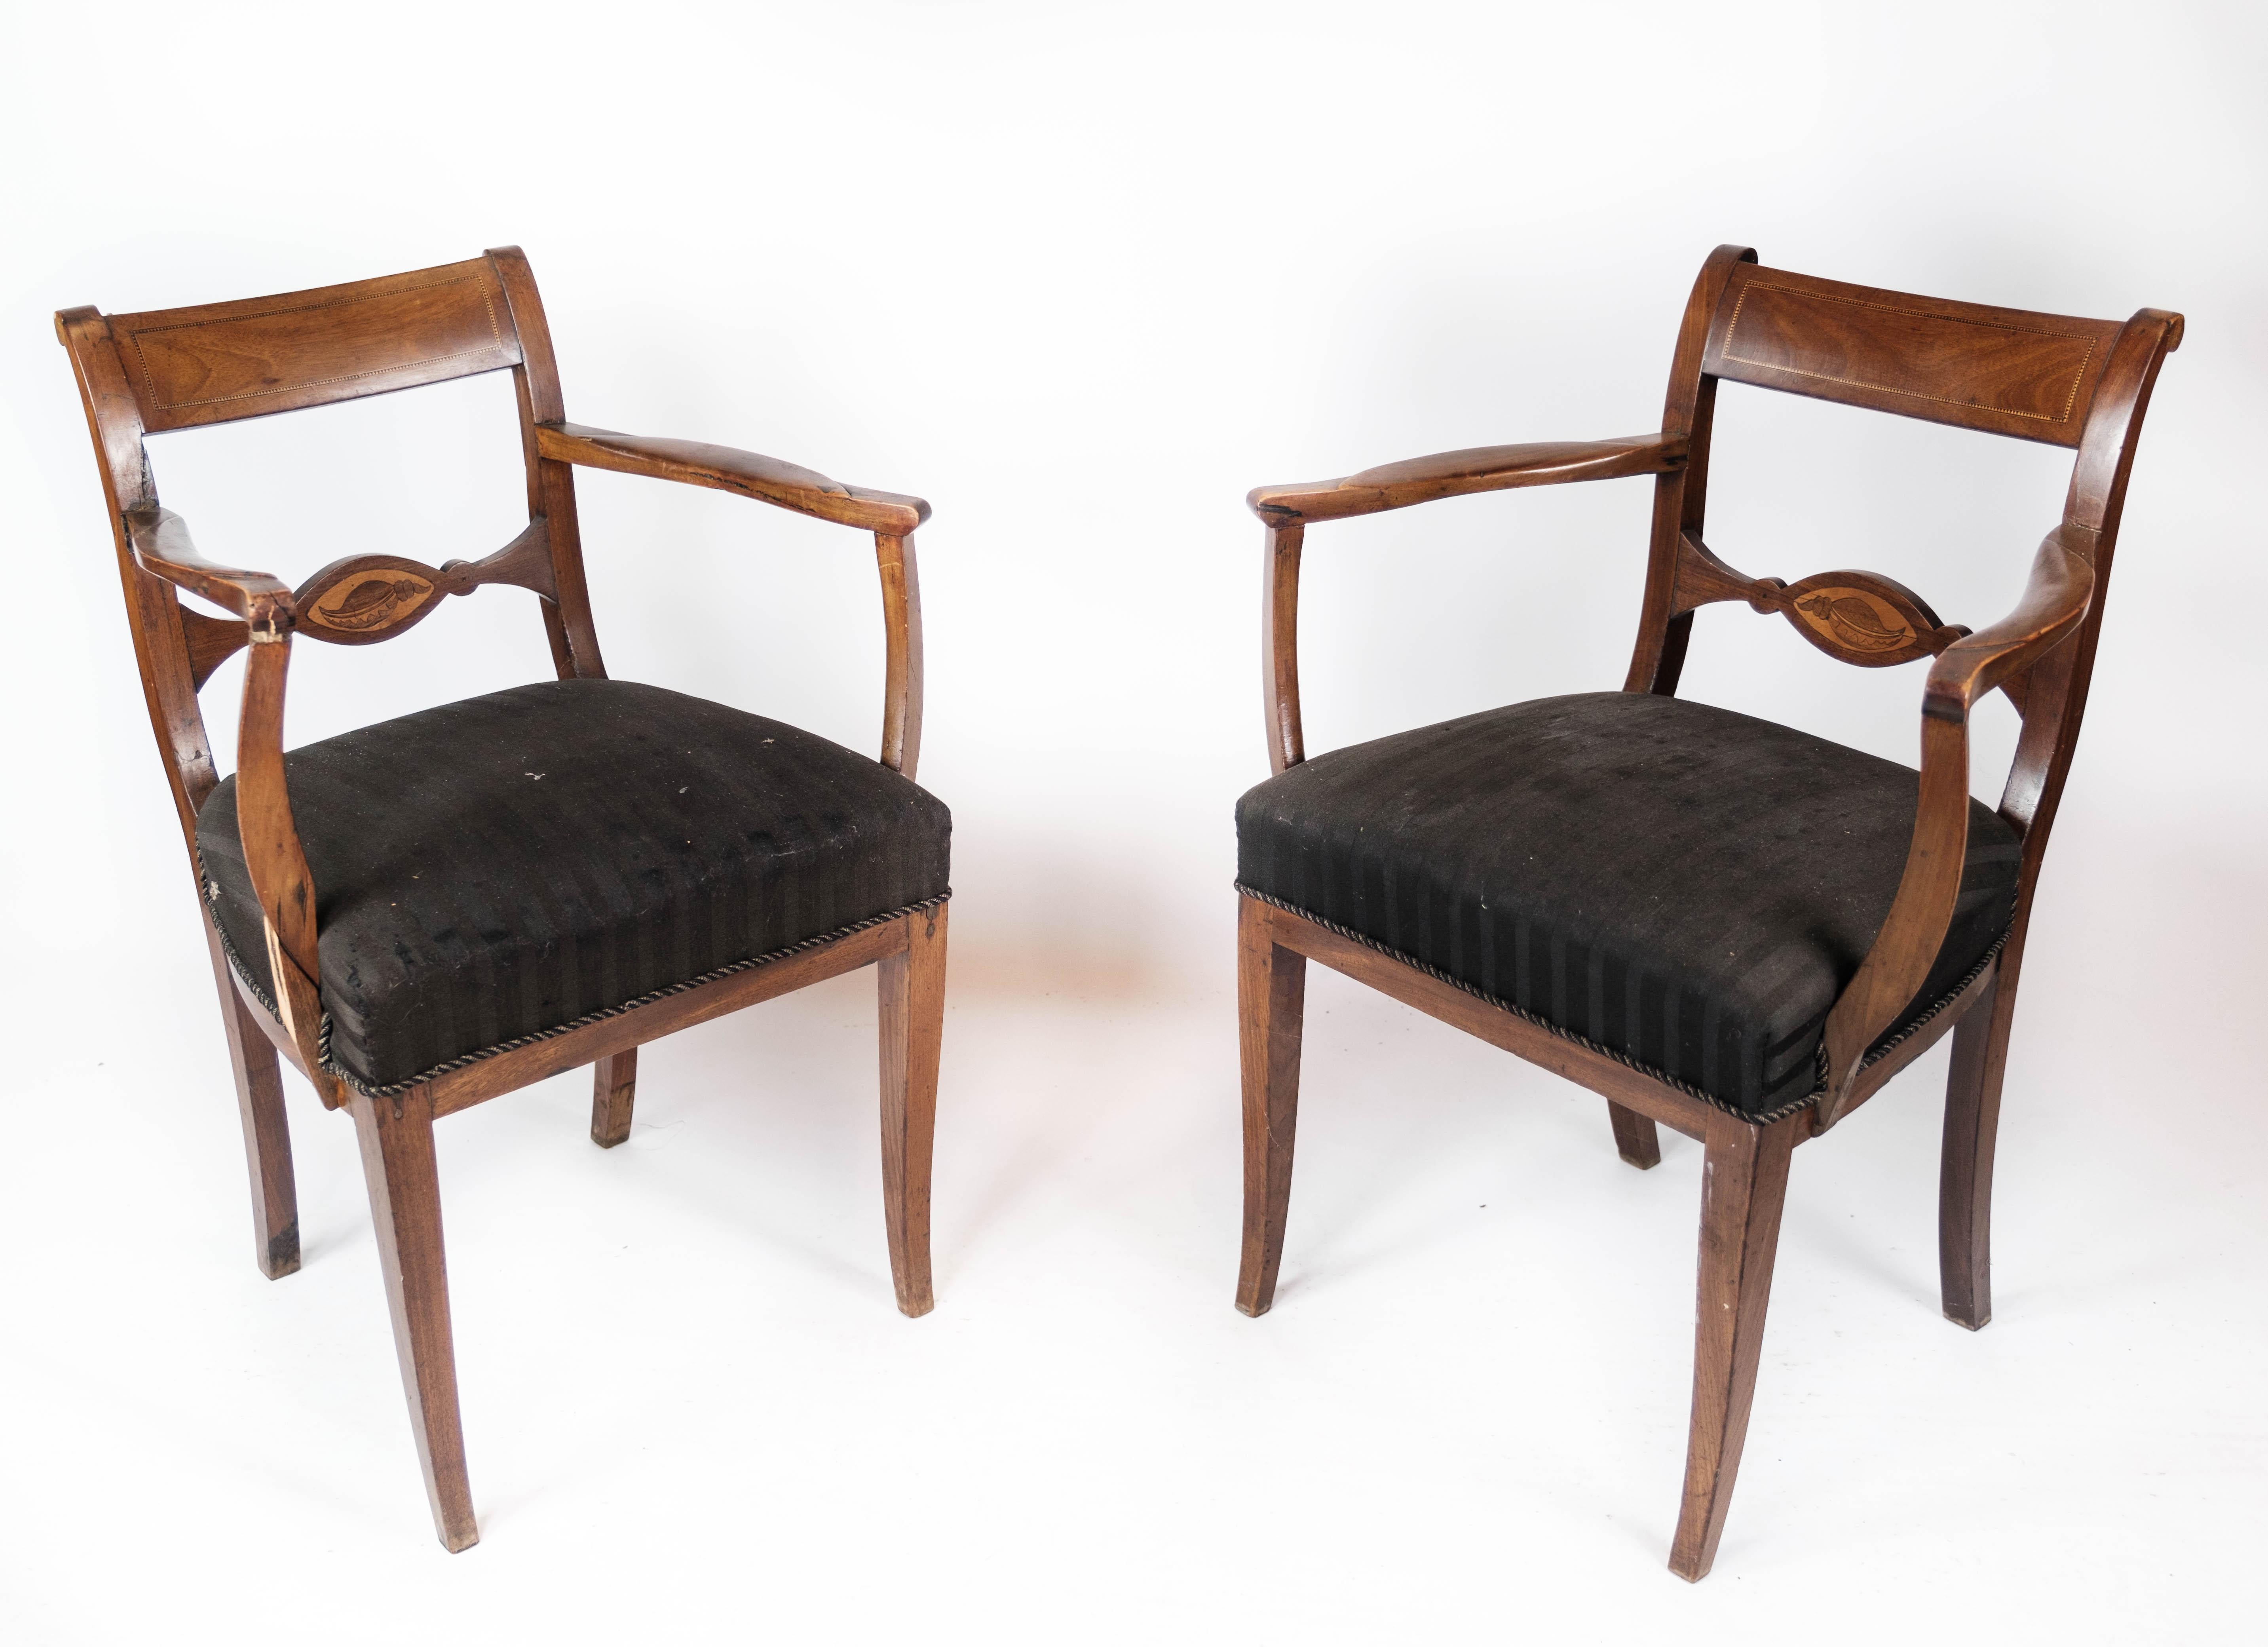 Other Set of Two Armchairs Made In Mahogany From 1860s For Sale